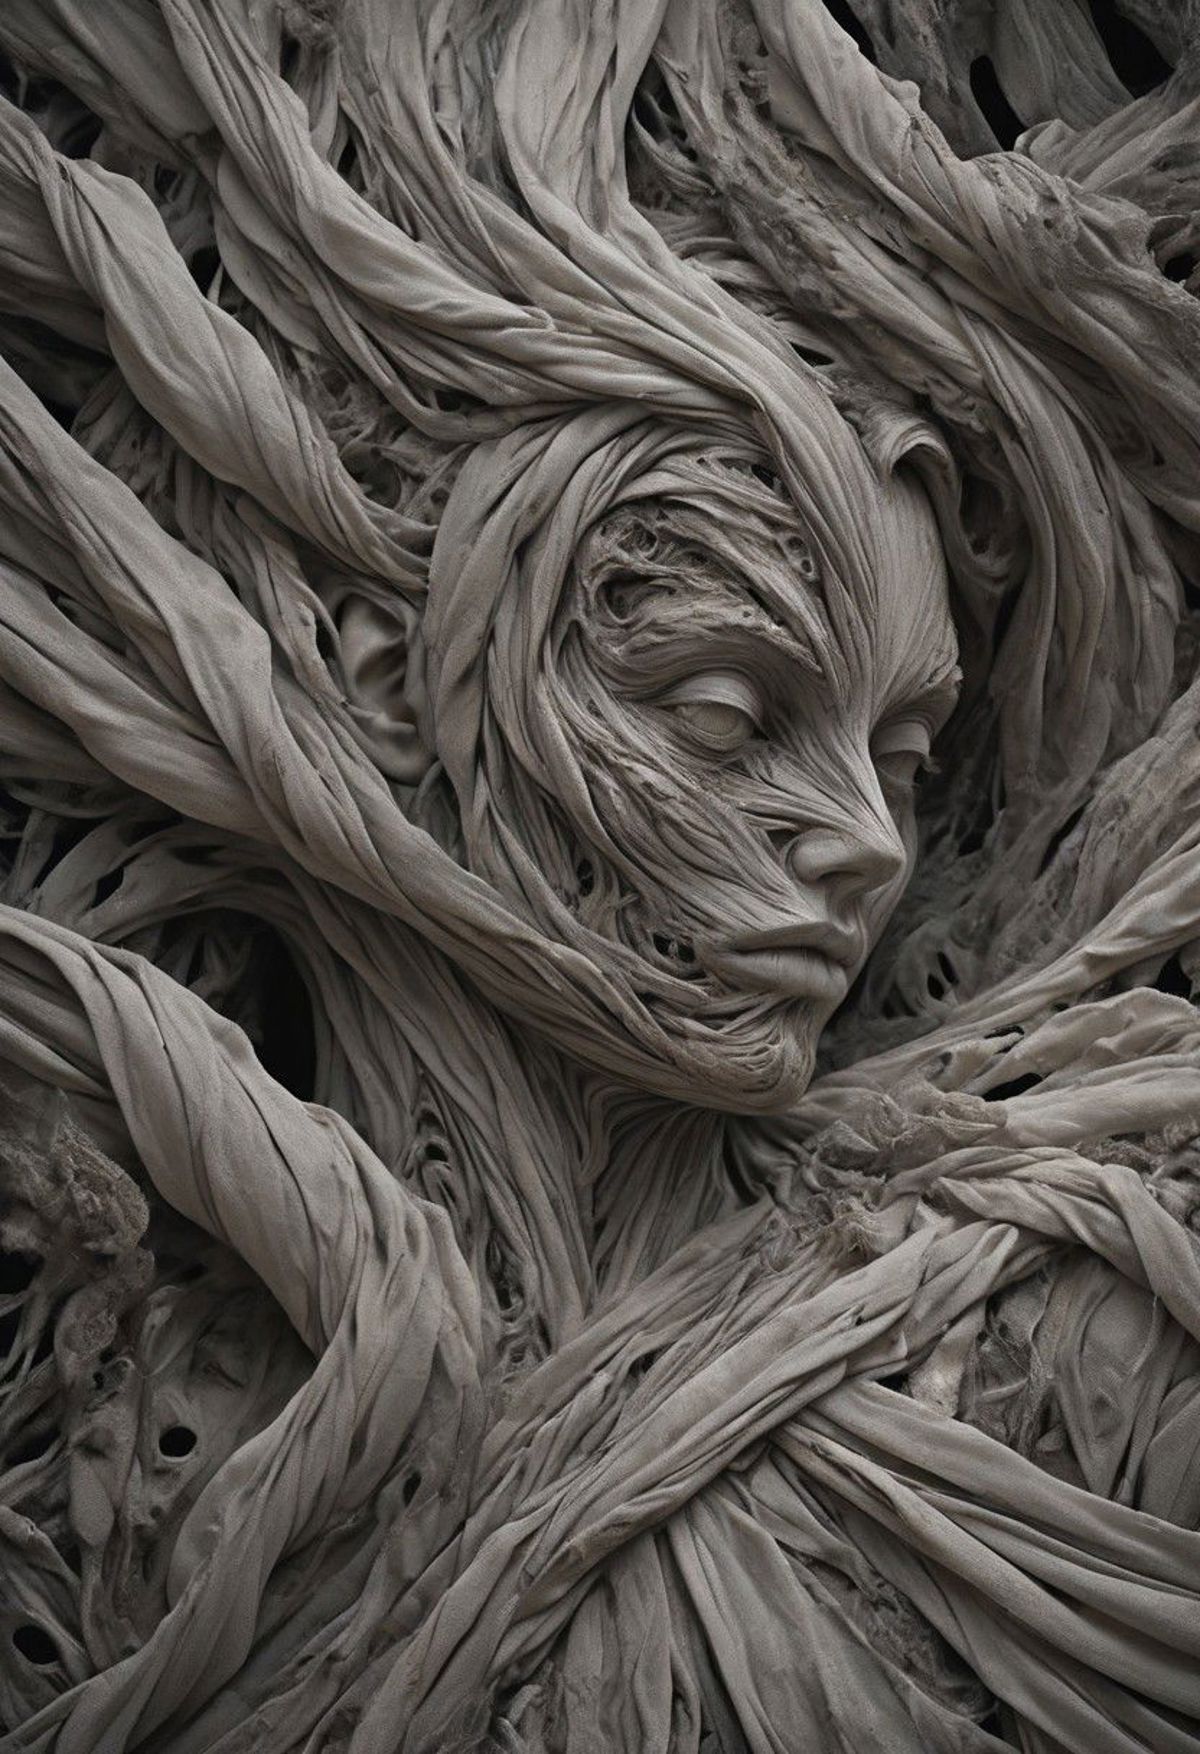 The Artistic Sculpture of a Woman's Face with a Detailed Textured Design